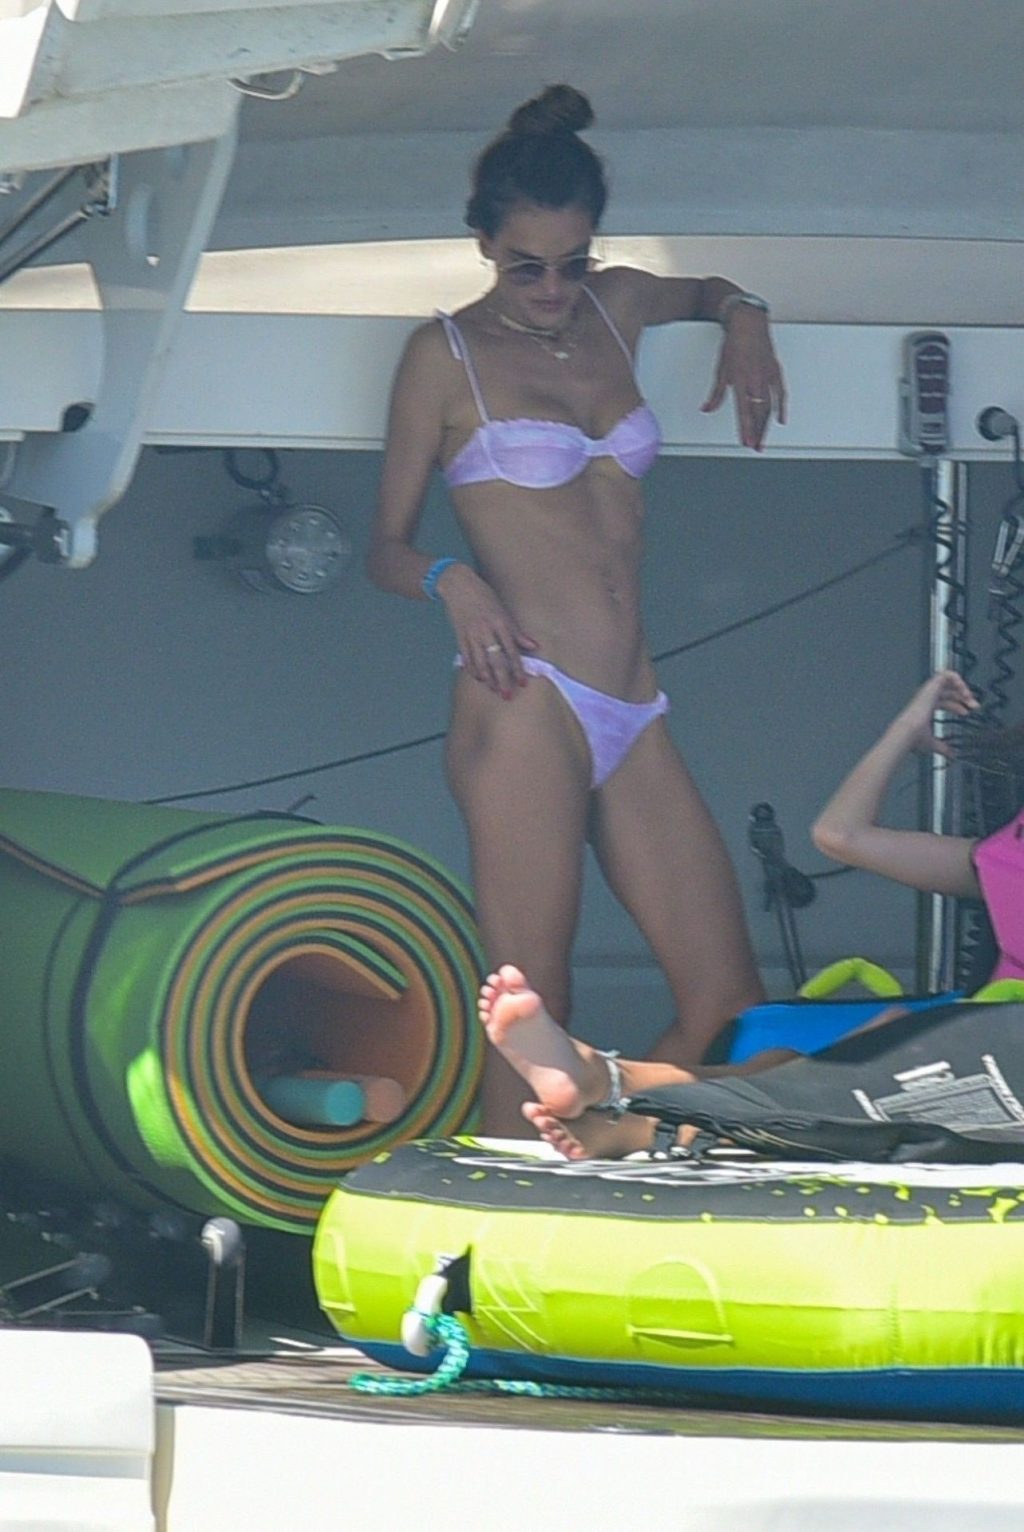 Alessandra Ambrosio Enjoys the First Day of 2021 Aboard a Luxury Yacht (87 Photos)